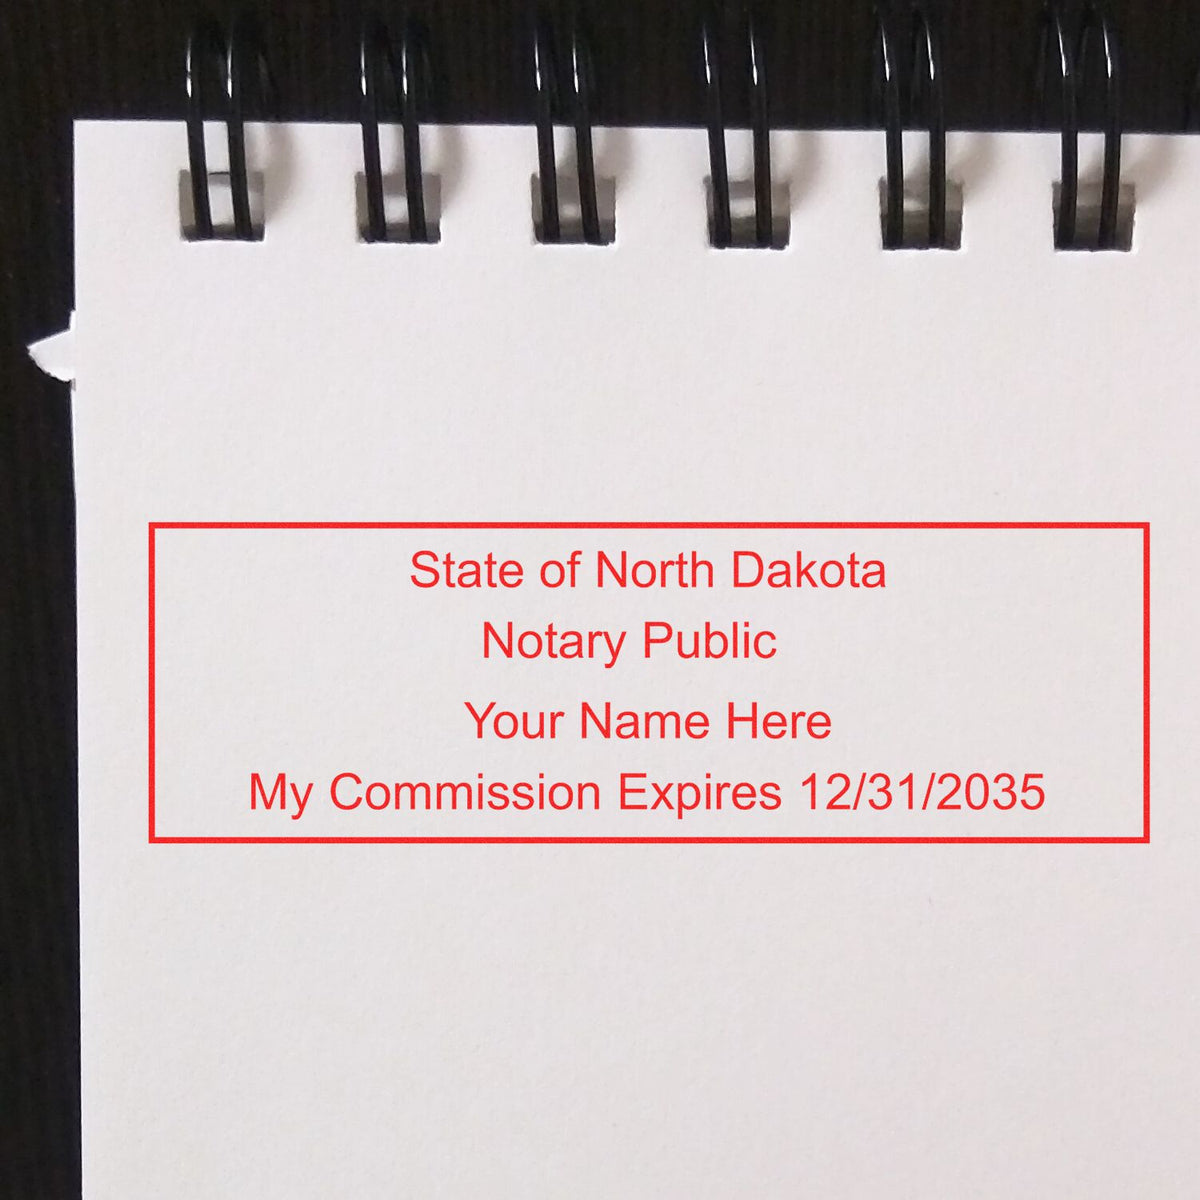 Another Example of a stamped impression of the Super Slim North Dakota Notary Public Stamp on a piece of office paper.